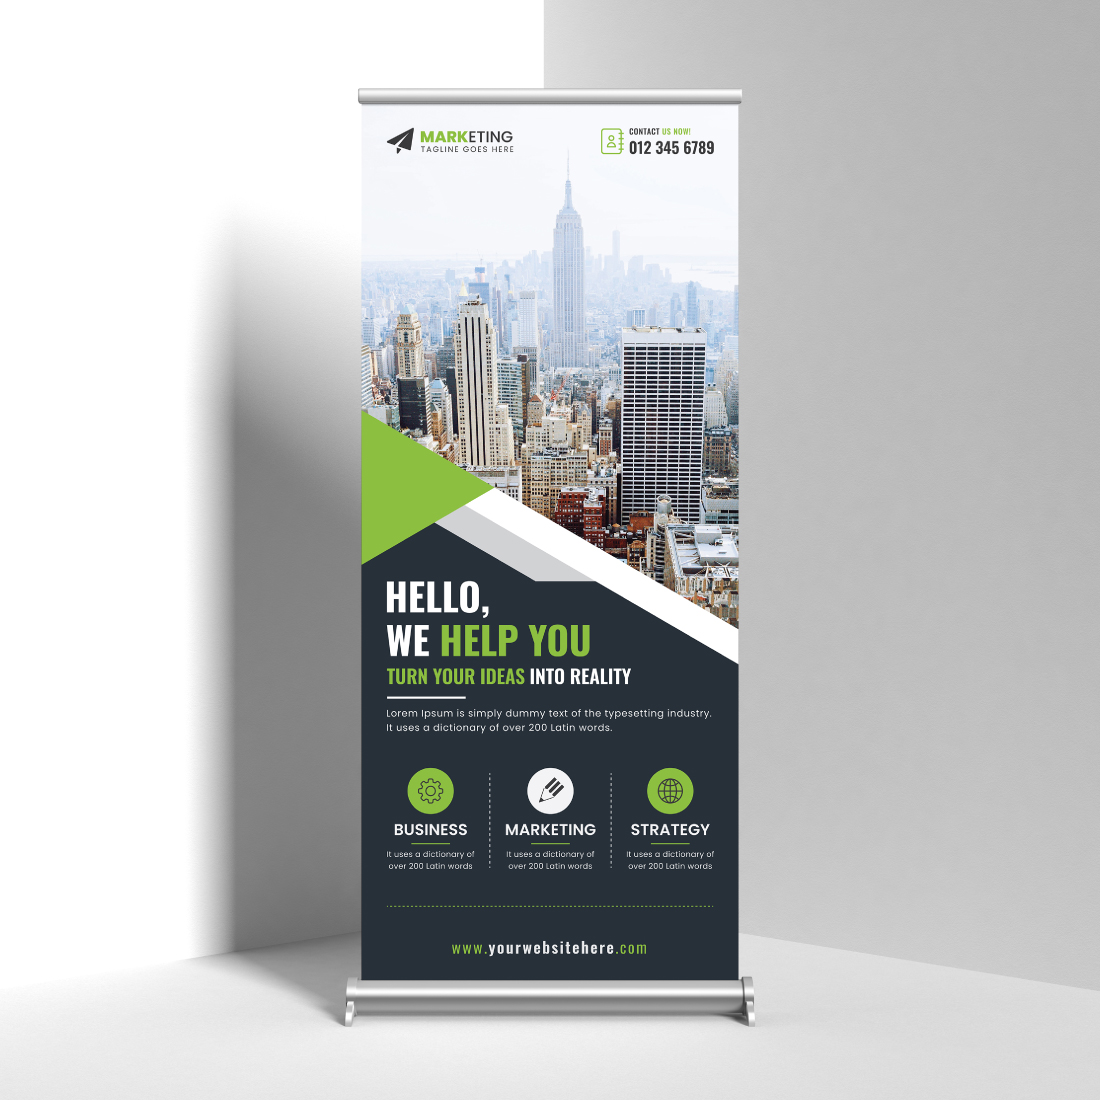 Image of a corporate roll up banner in a beautiful green design